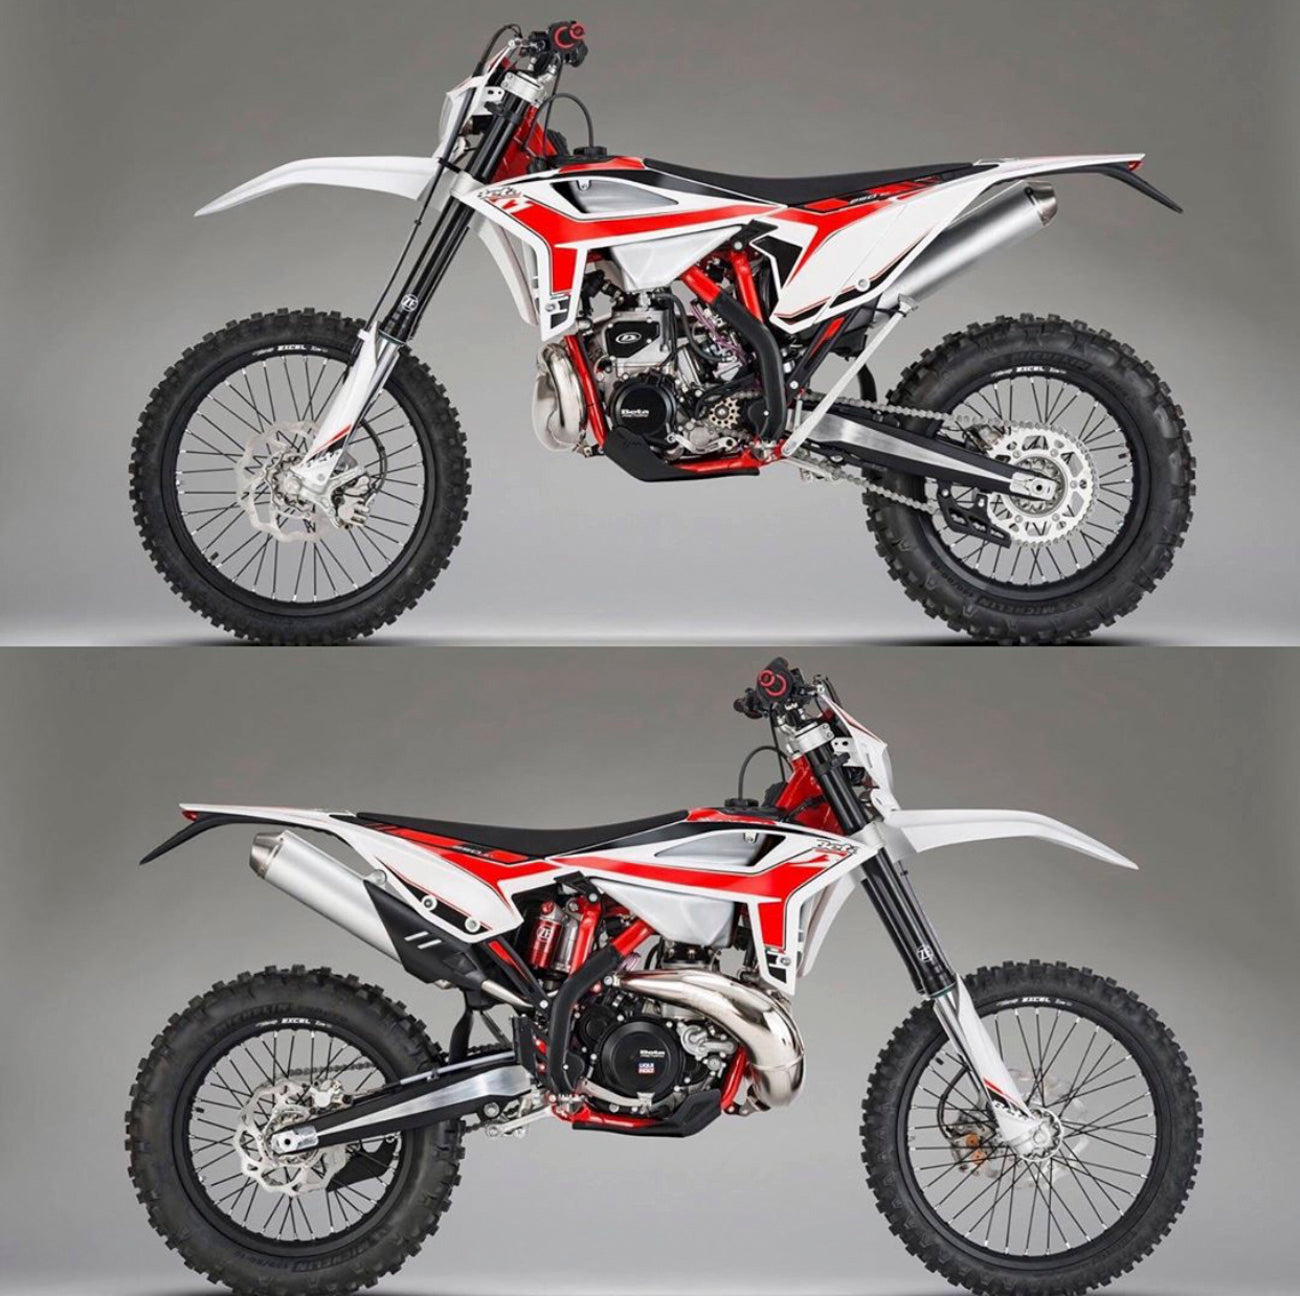 New 2020 Beta 250/300 rr release: 2 stroke counterbalance with a carb! But where the heck is the kickstart?